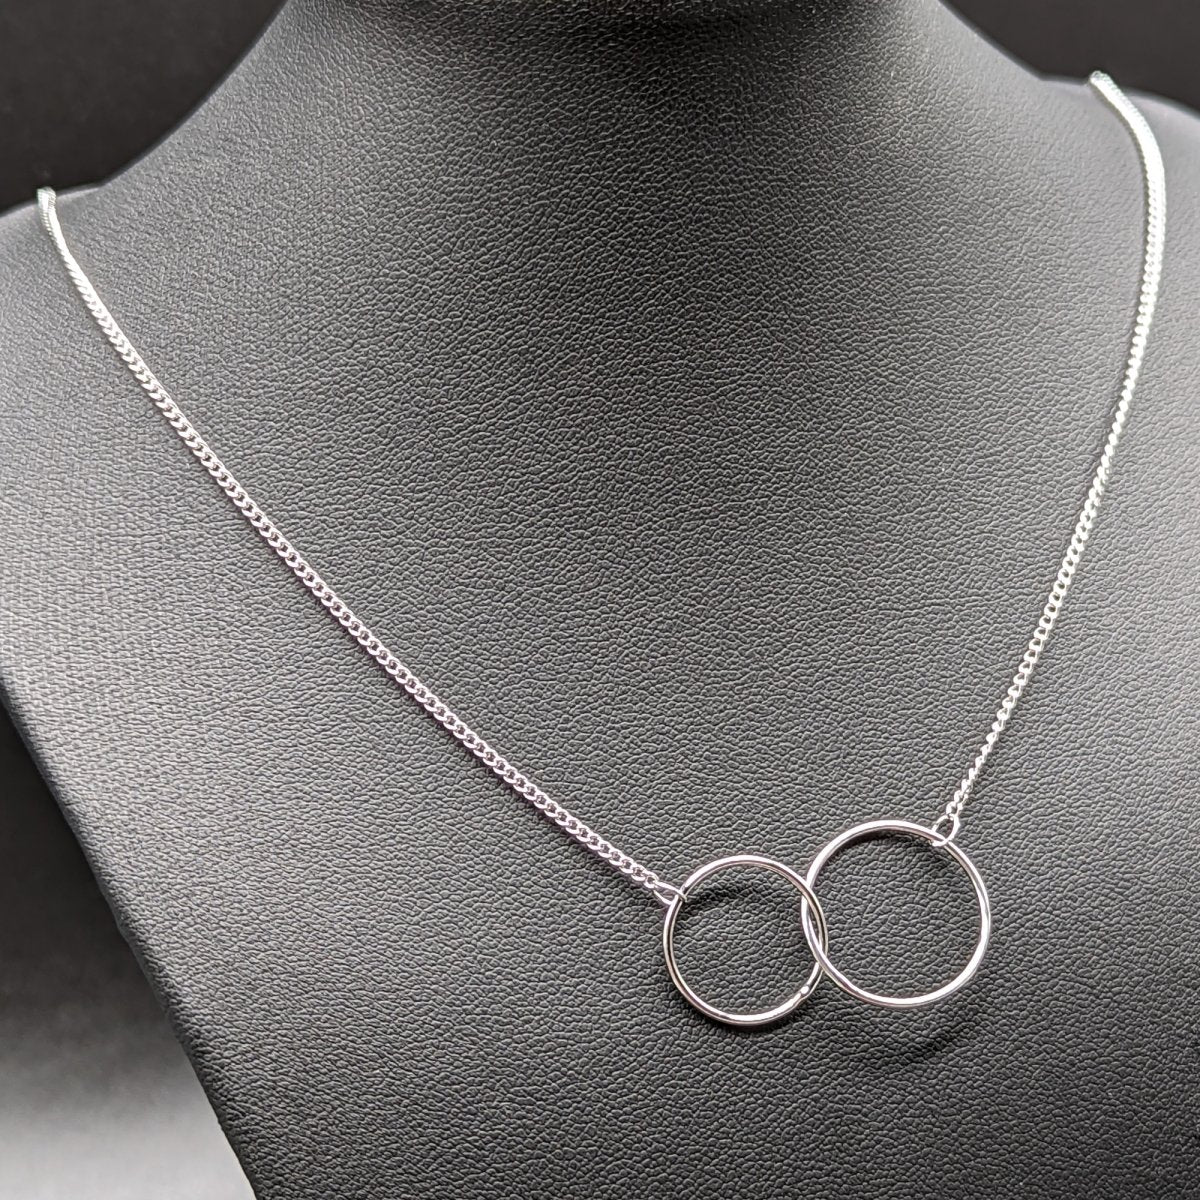 Gift for Bonus Daughter - Interlocking Circles Necklace - Meaningful Cards